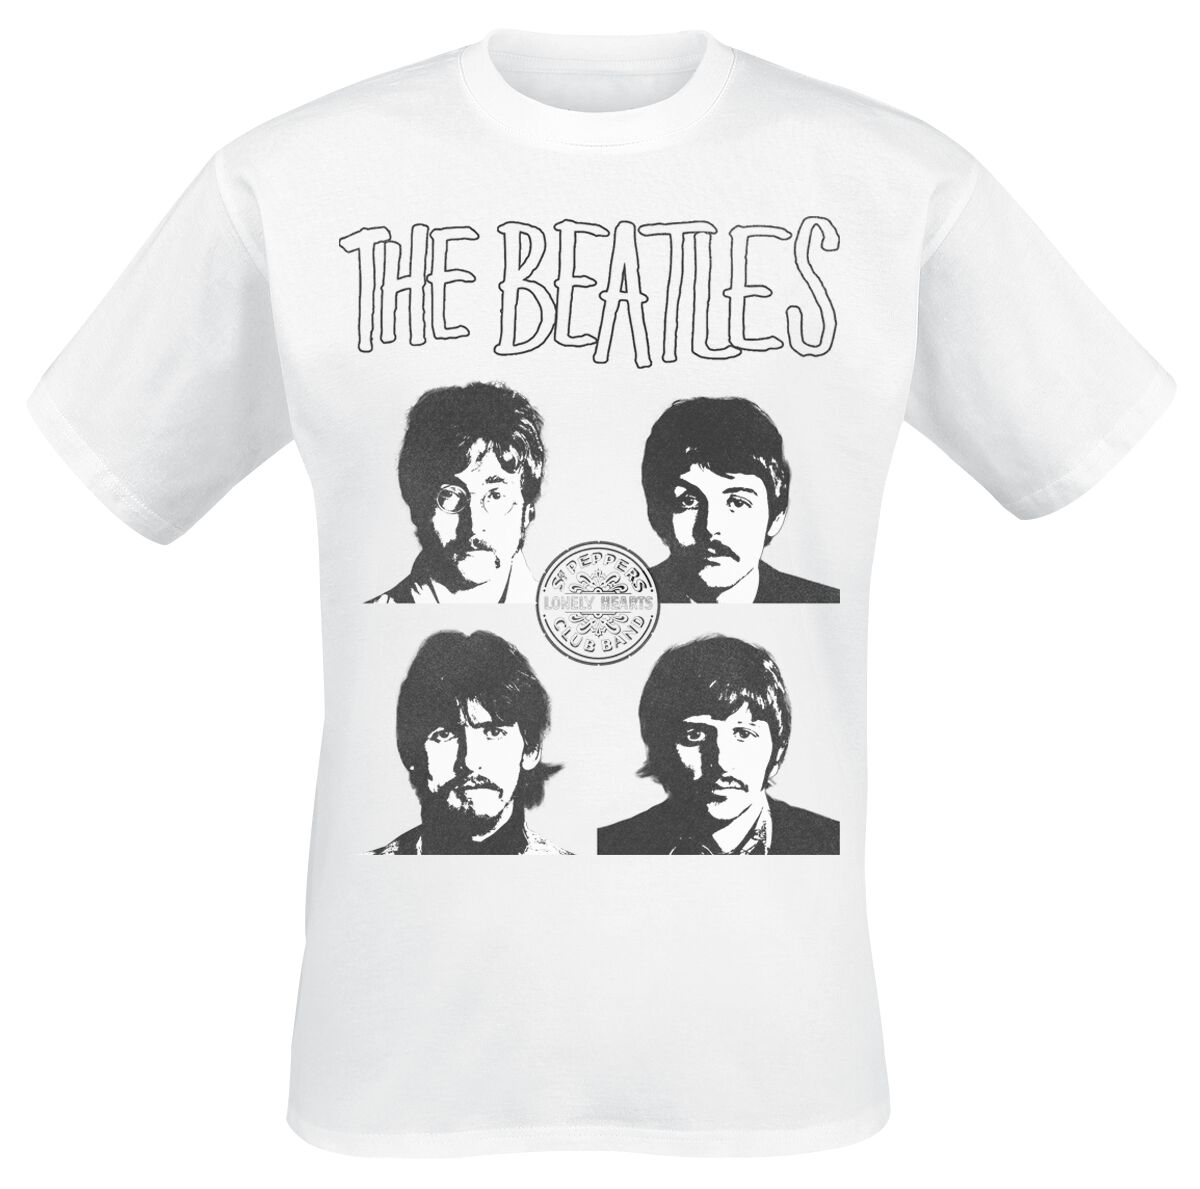 The Beatles Sgt. Peppers Portrais T-Shirt weiß in XL